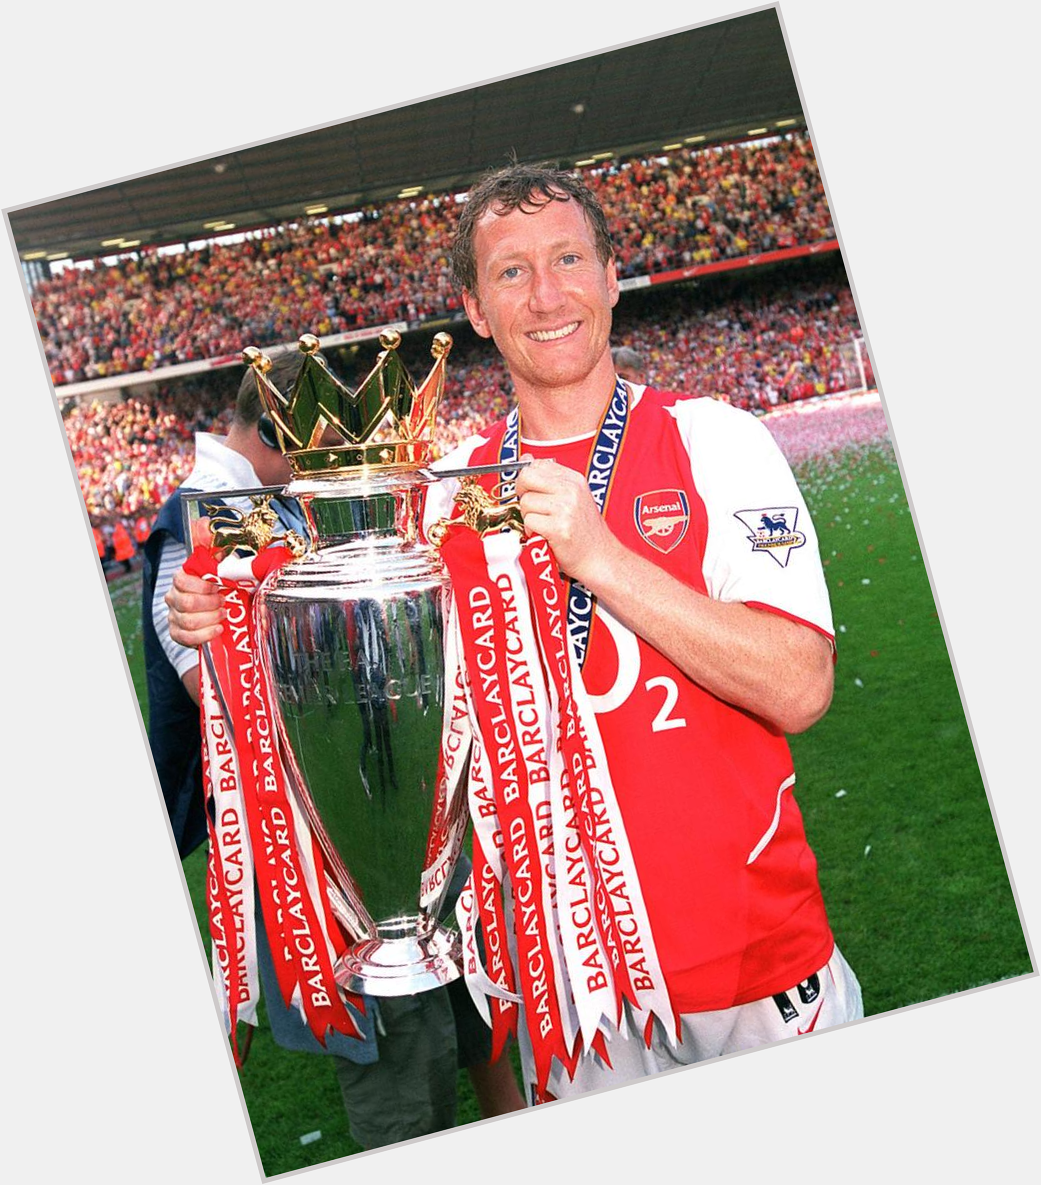 Happy Birthday to invincible Ray parlour, enjoy your day man! 